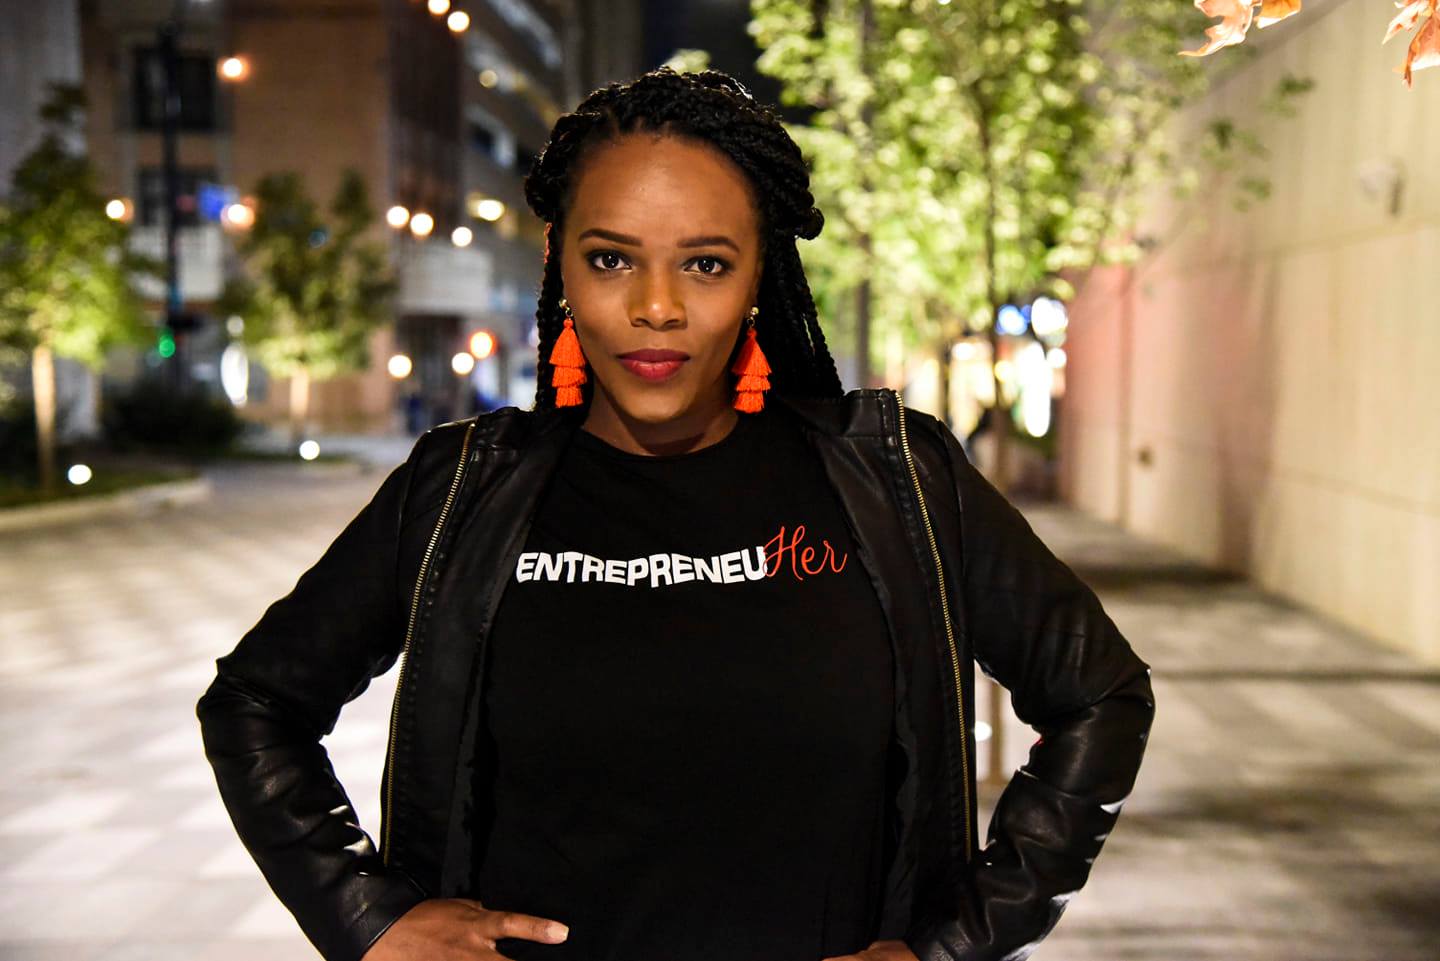 a woman named deidra mayberry posing outside with her hands on her hips as she wear a shirt that reads, "entrepreneuher"